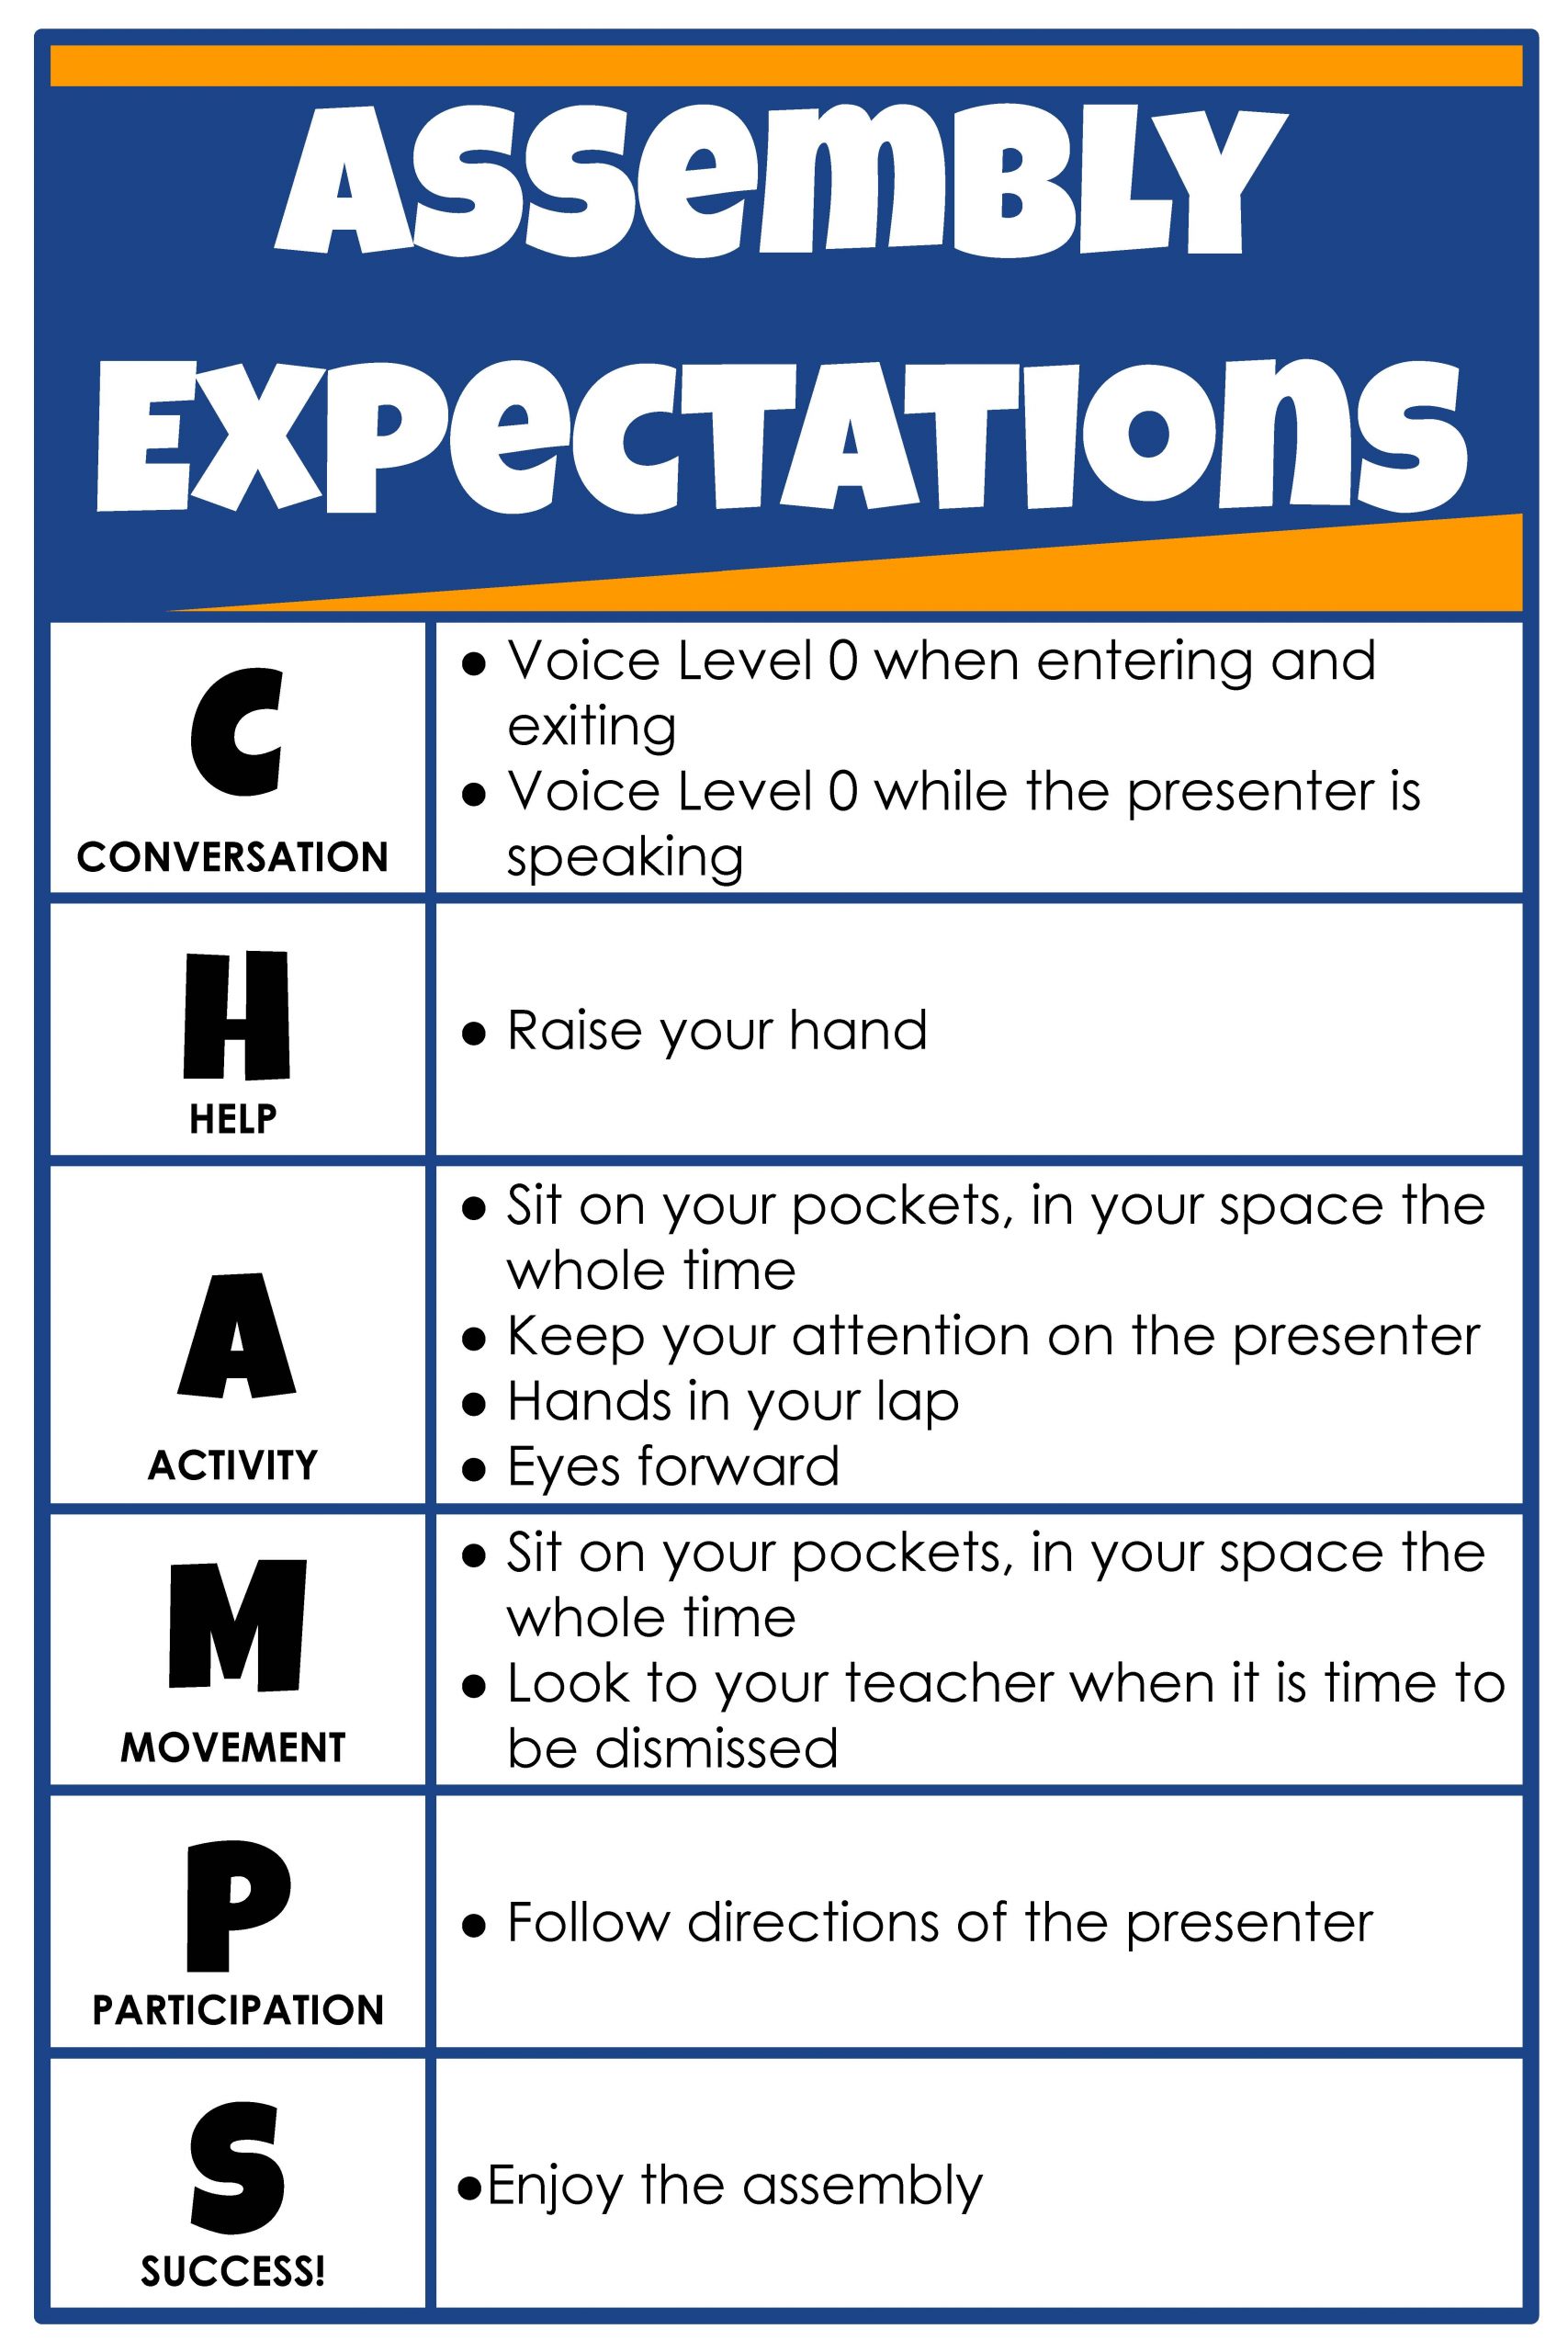 Assembly Expectations Poster